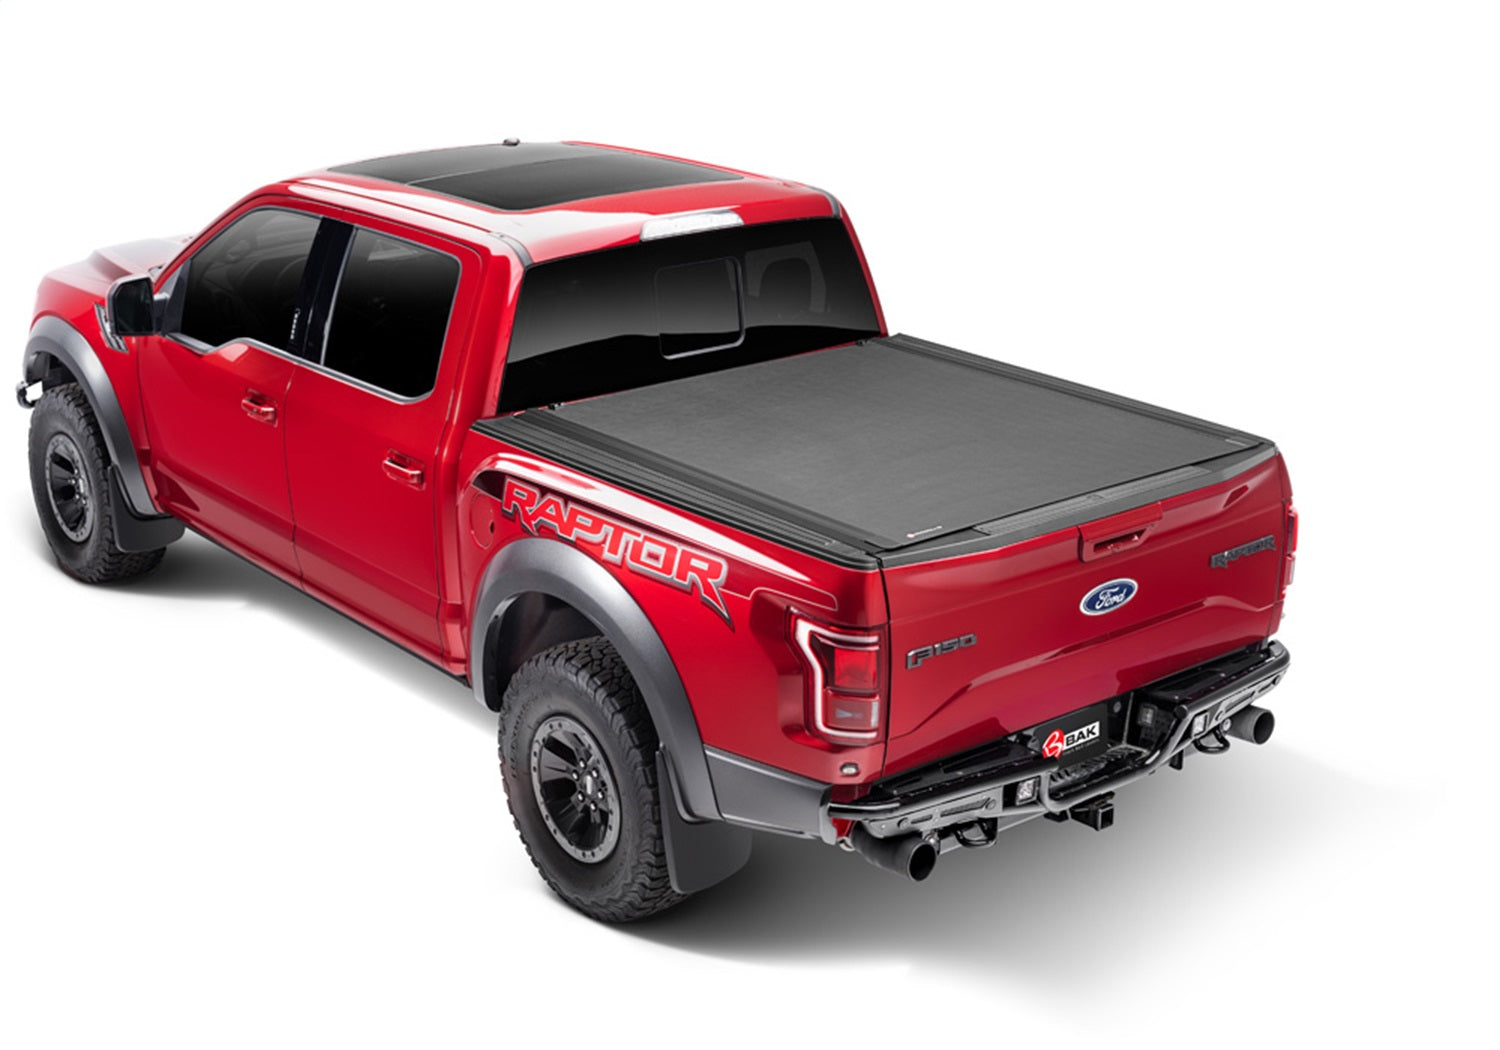 BAK Industries 80310 Revolver X4s Hard Rolling Truck Bed Cover